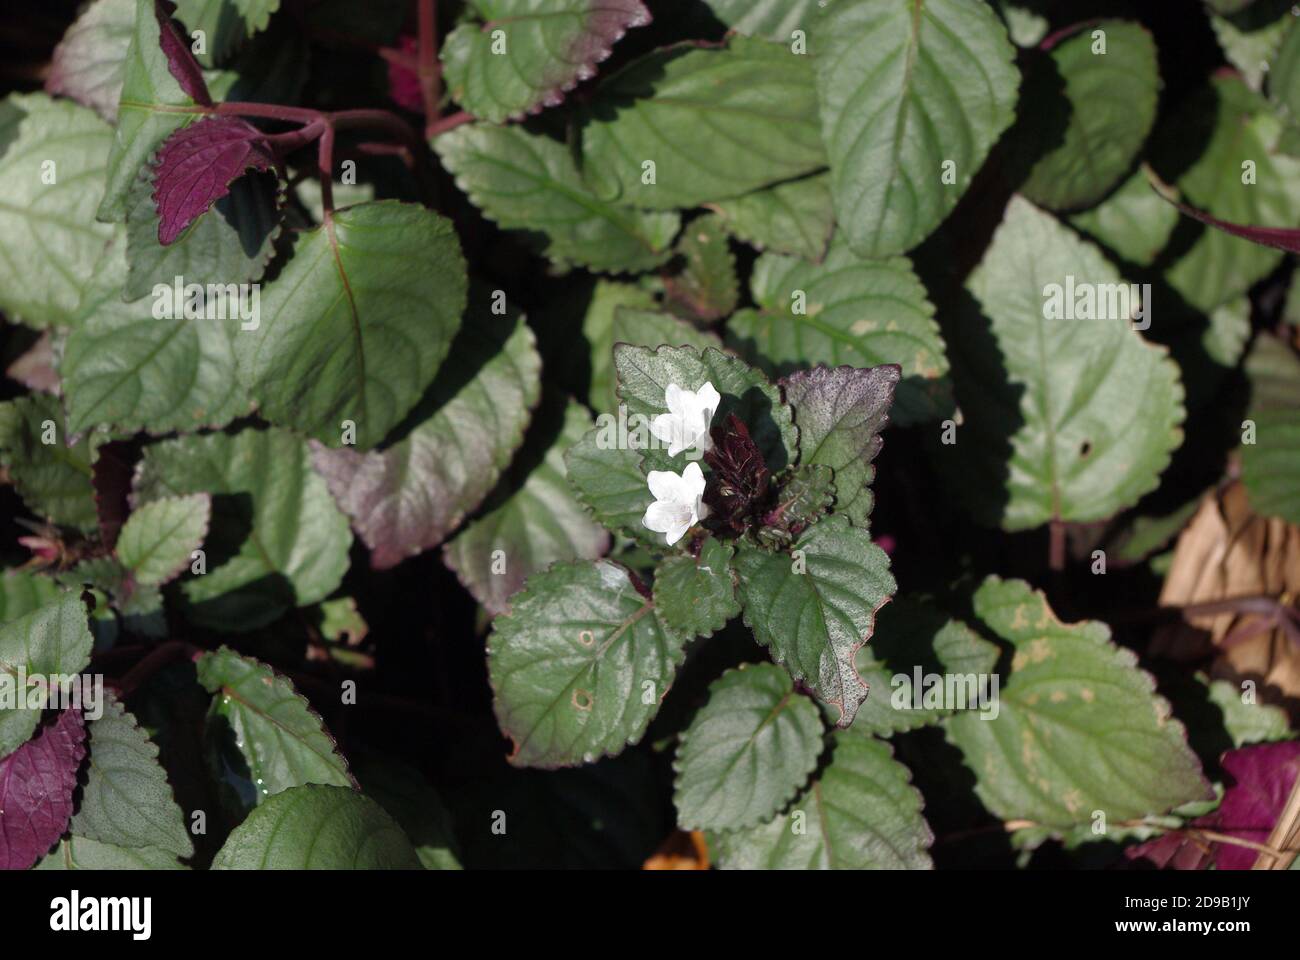 Hemigraphis alternata, commonly called Hemigraphis colorata or sometimes red ivy Stock Photo